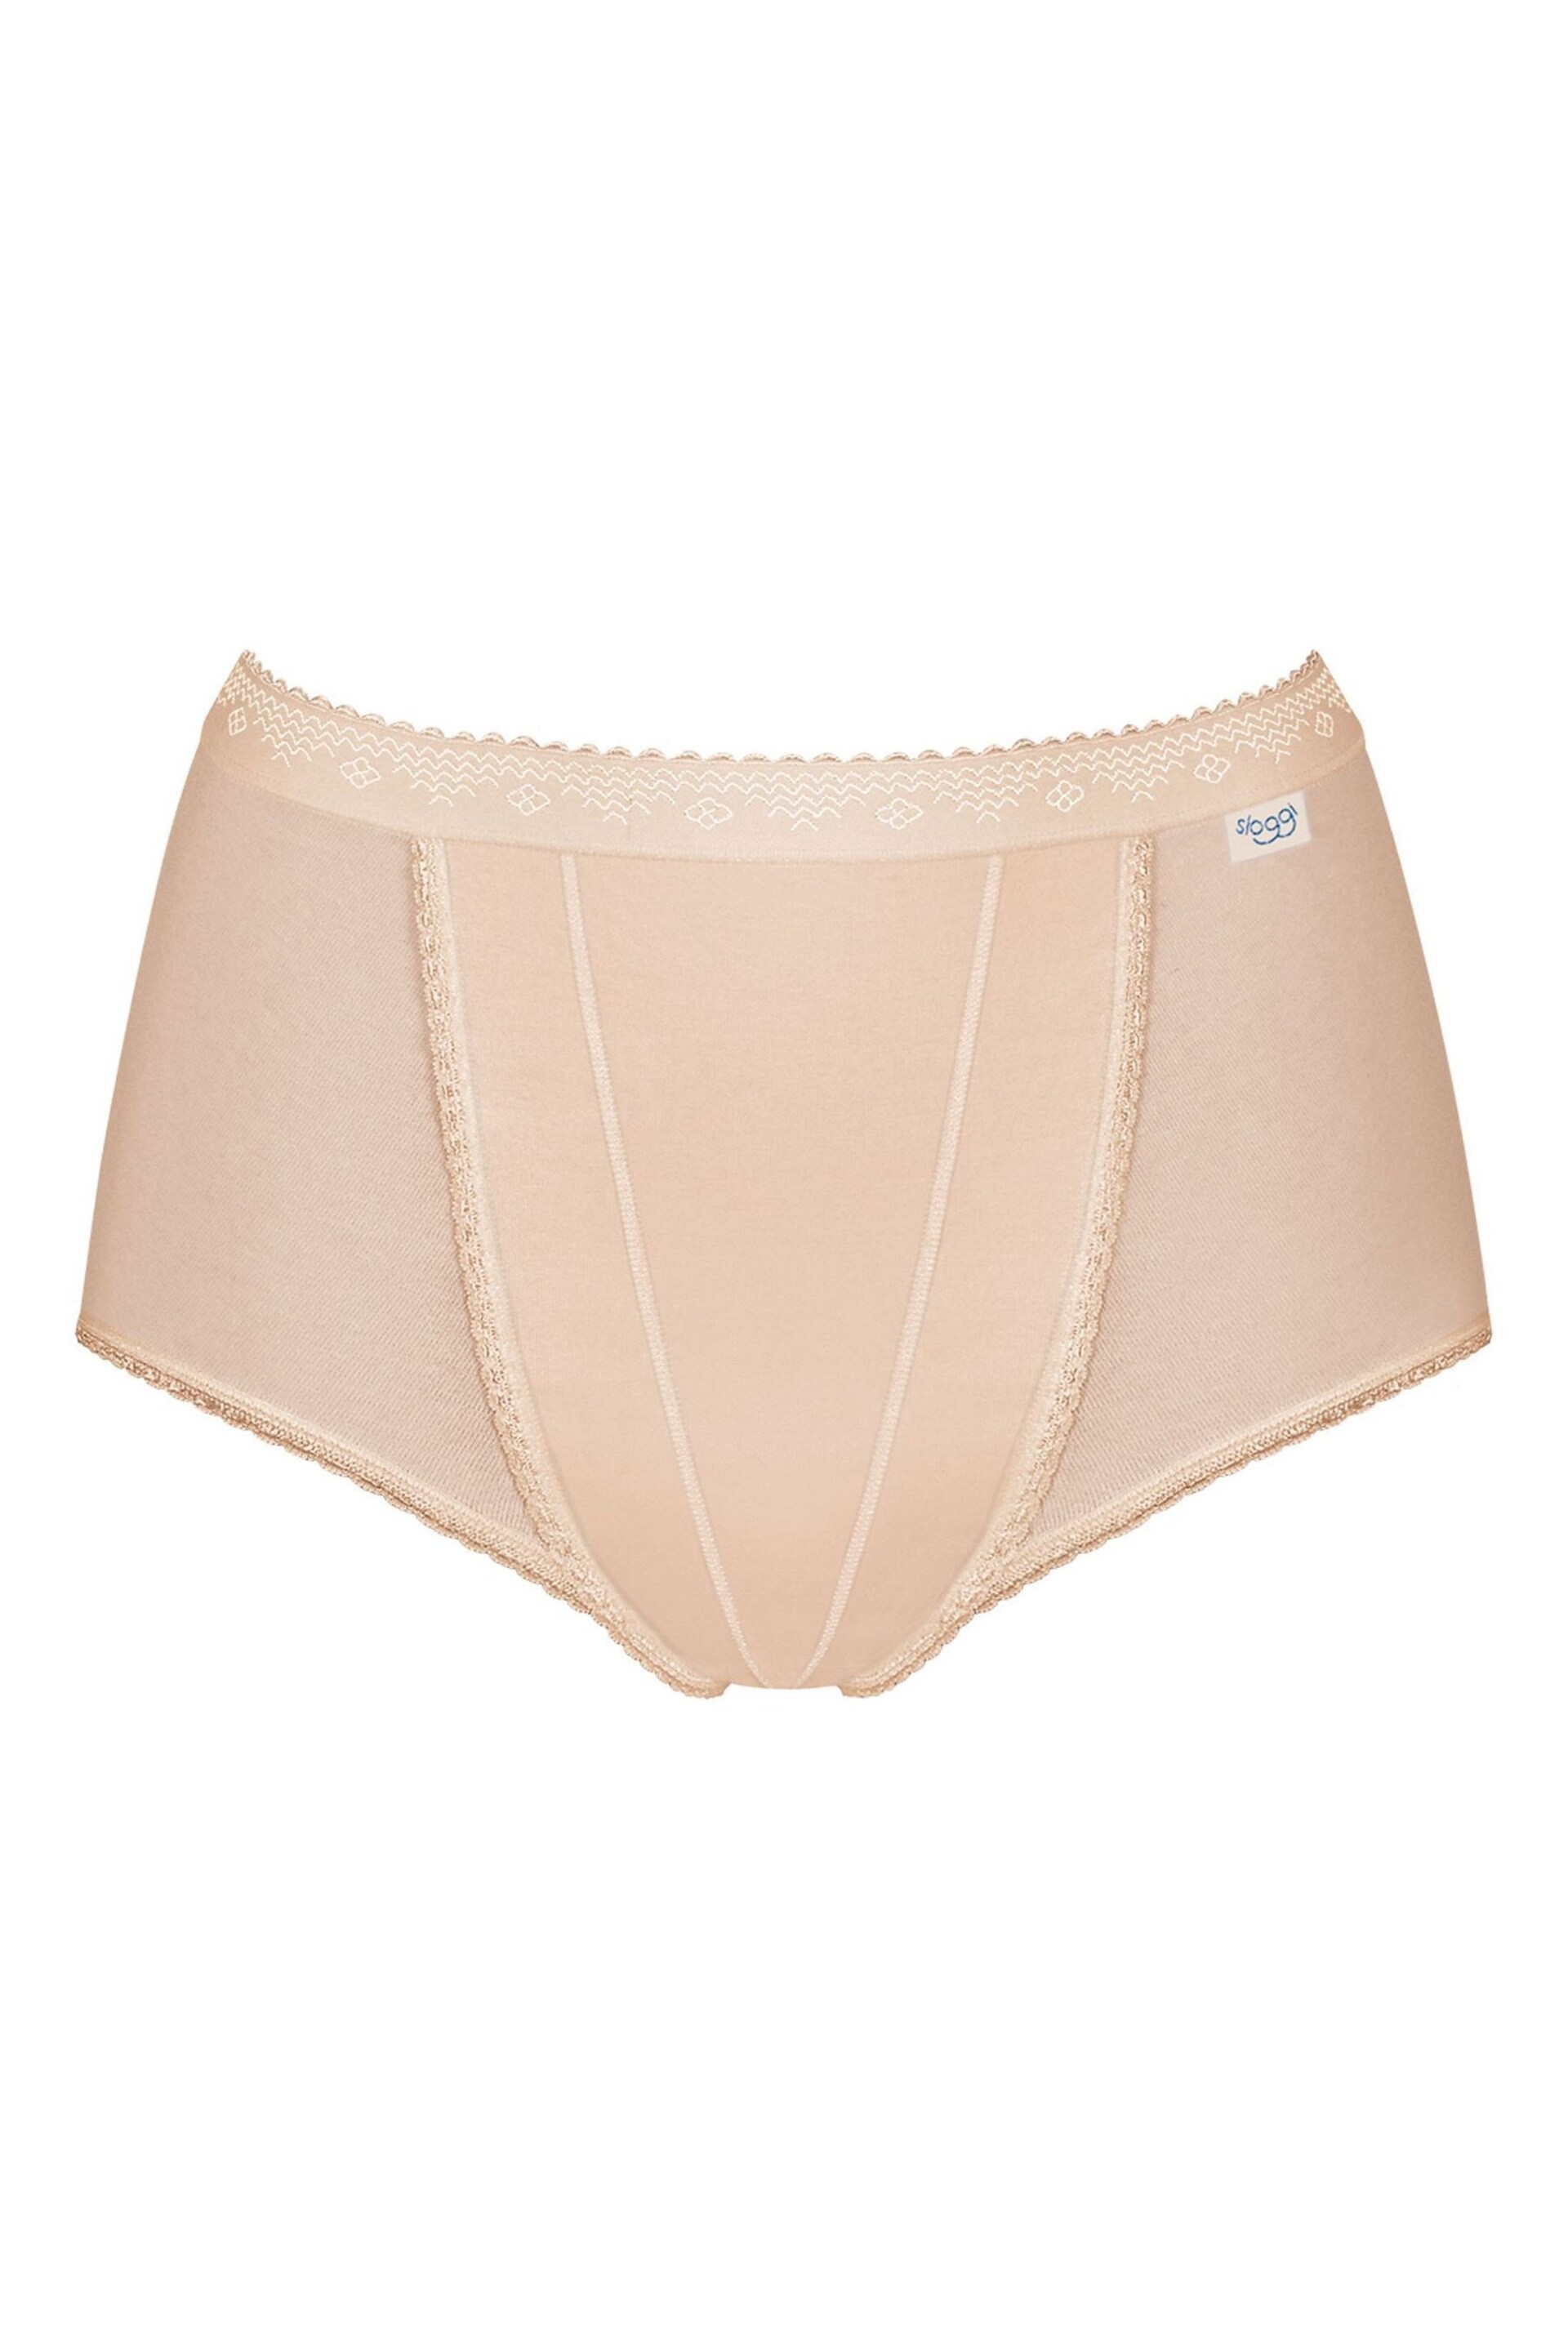 Sloggi Tummy Control 2 Pack Knickers - Image 5 of 5